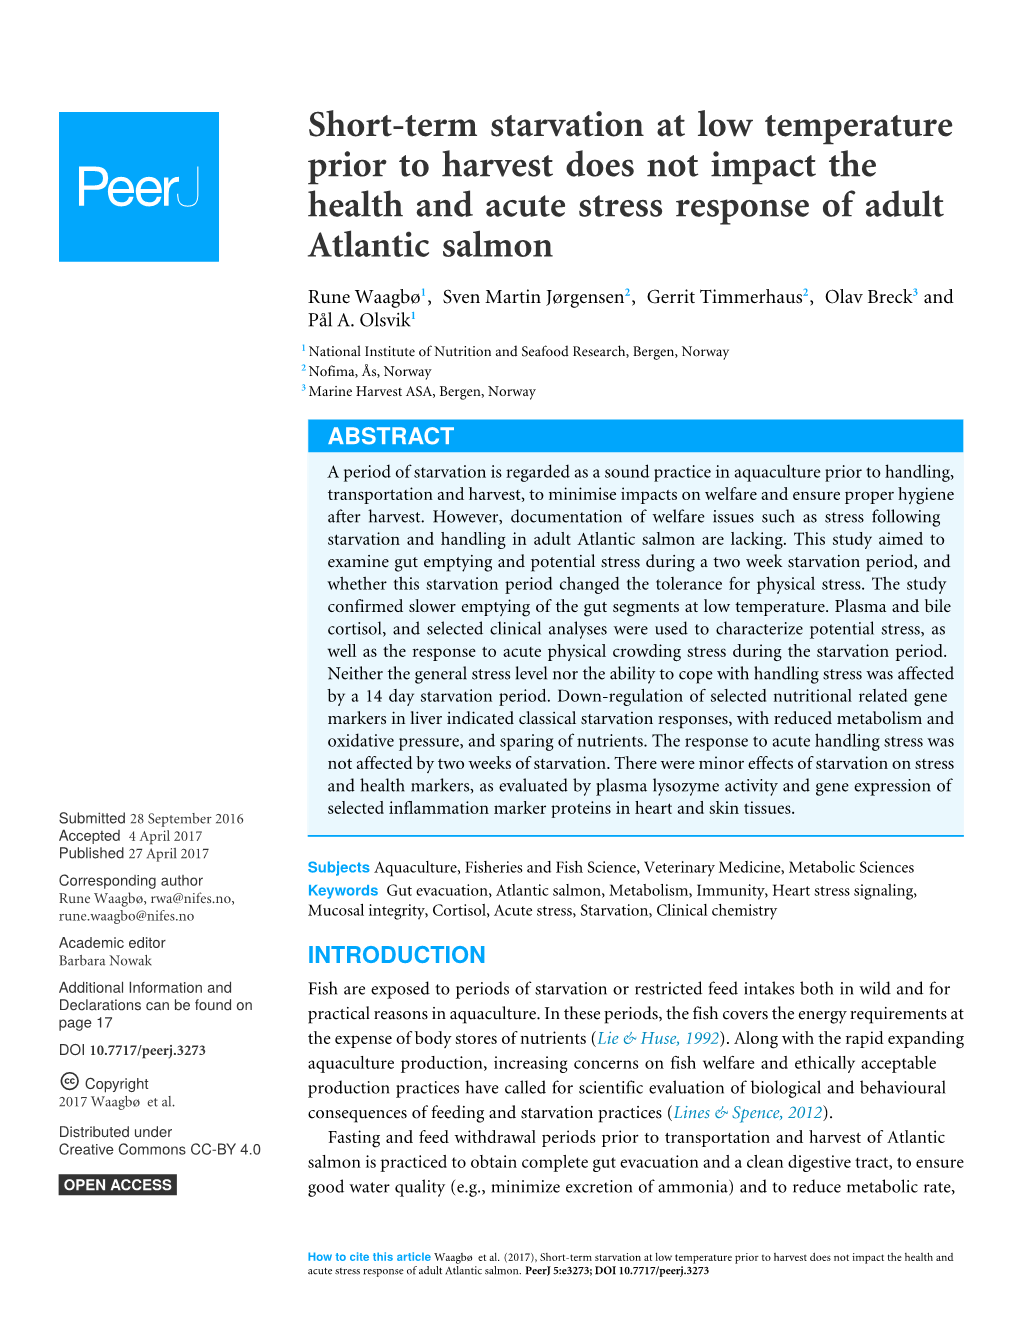 Short-Term Starvation at Low Temperature Prior to Harvest Does Not Impact the Health and Acute Stress Response of Adult Atlantic Salmon